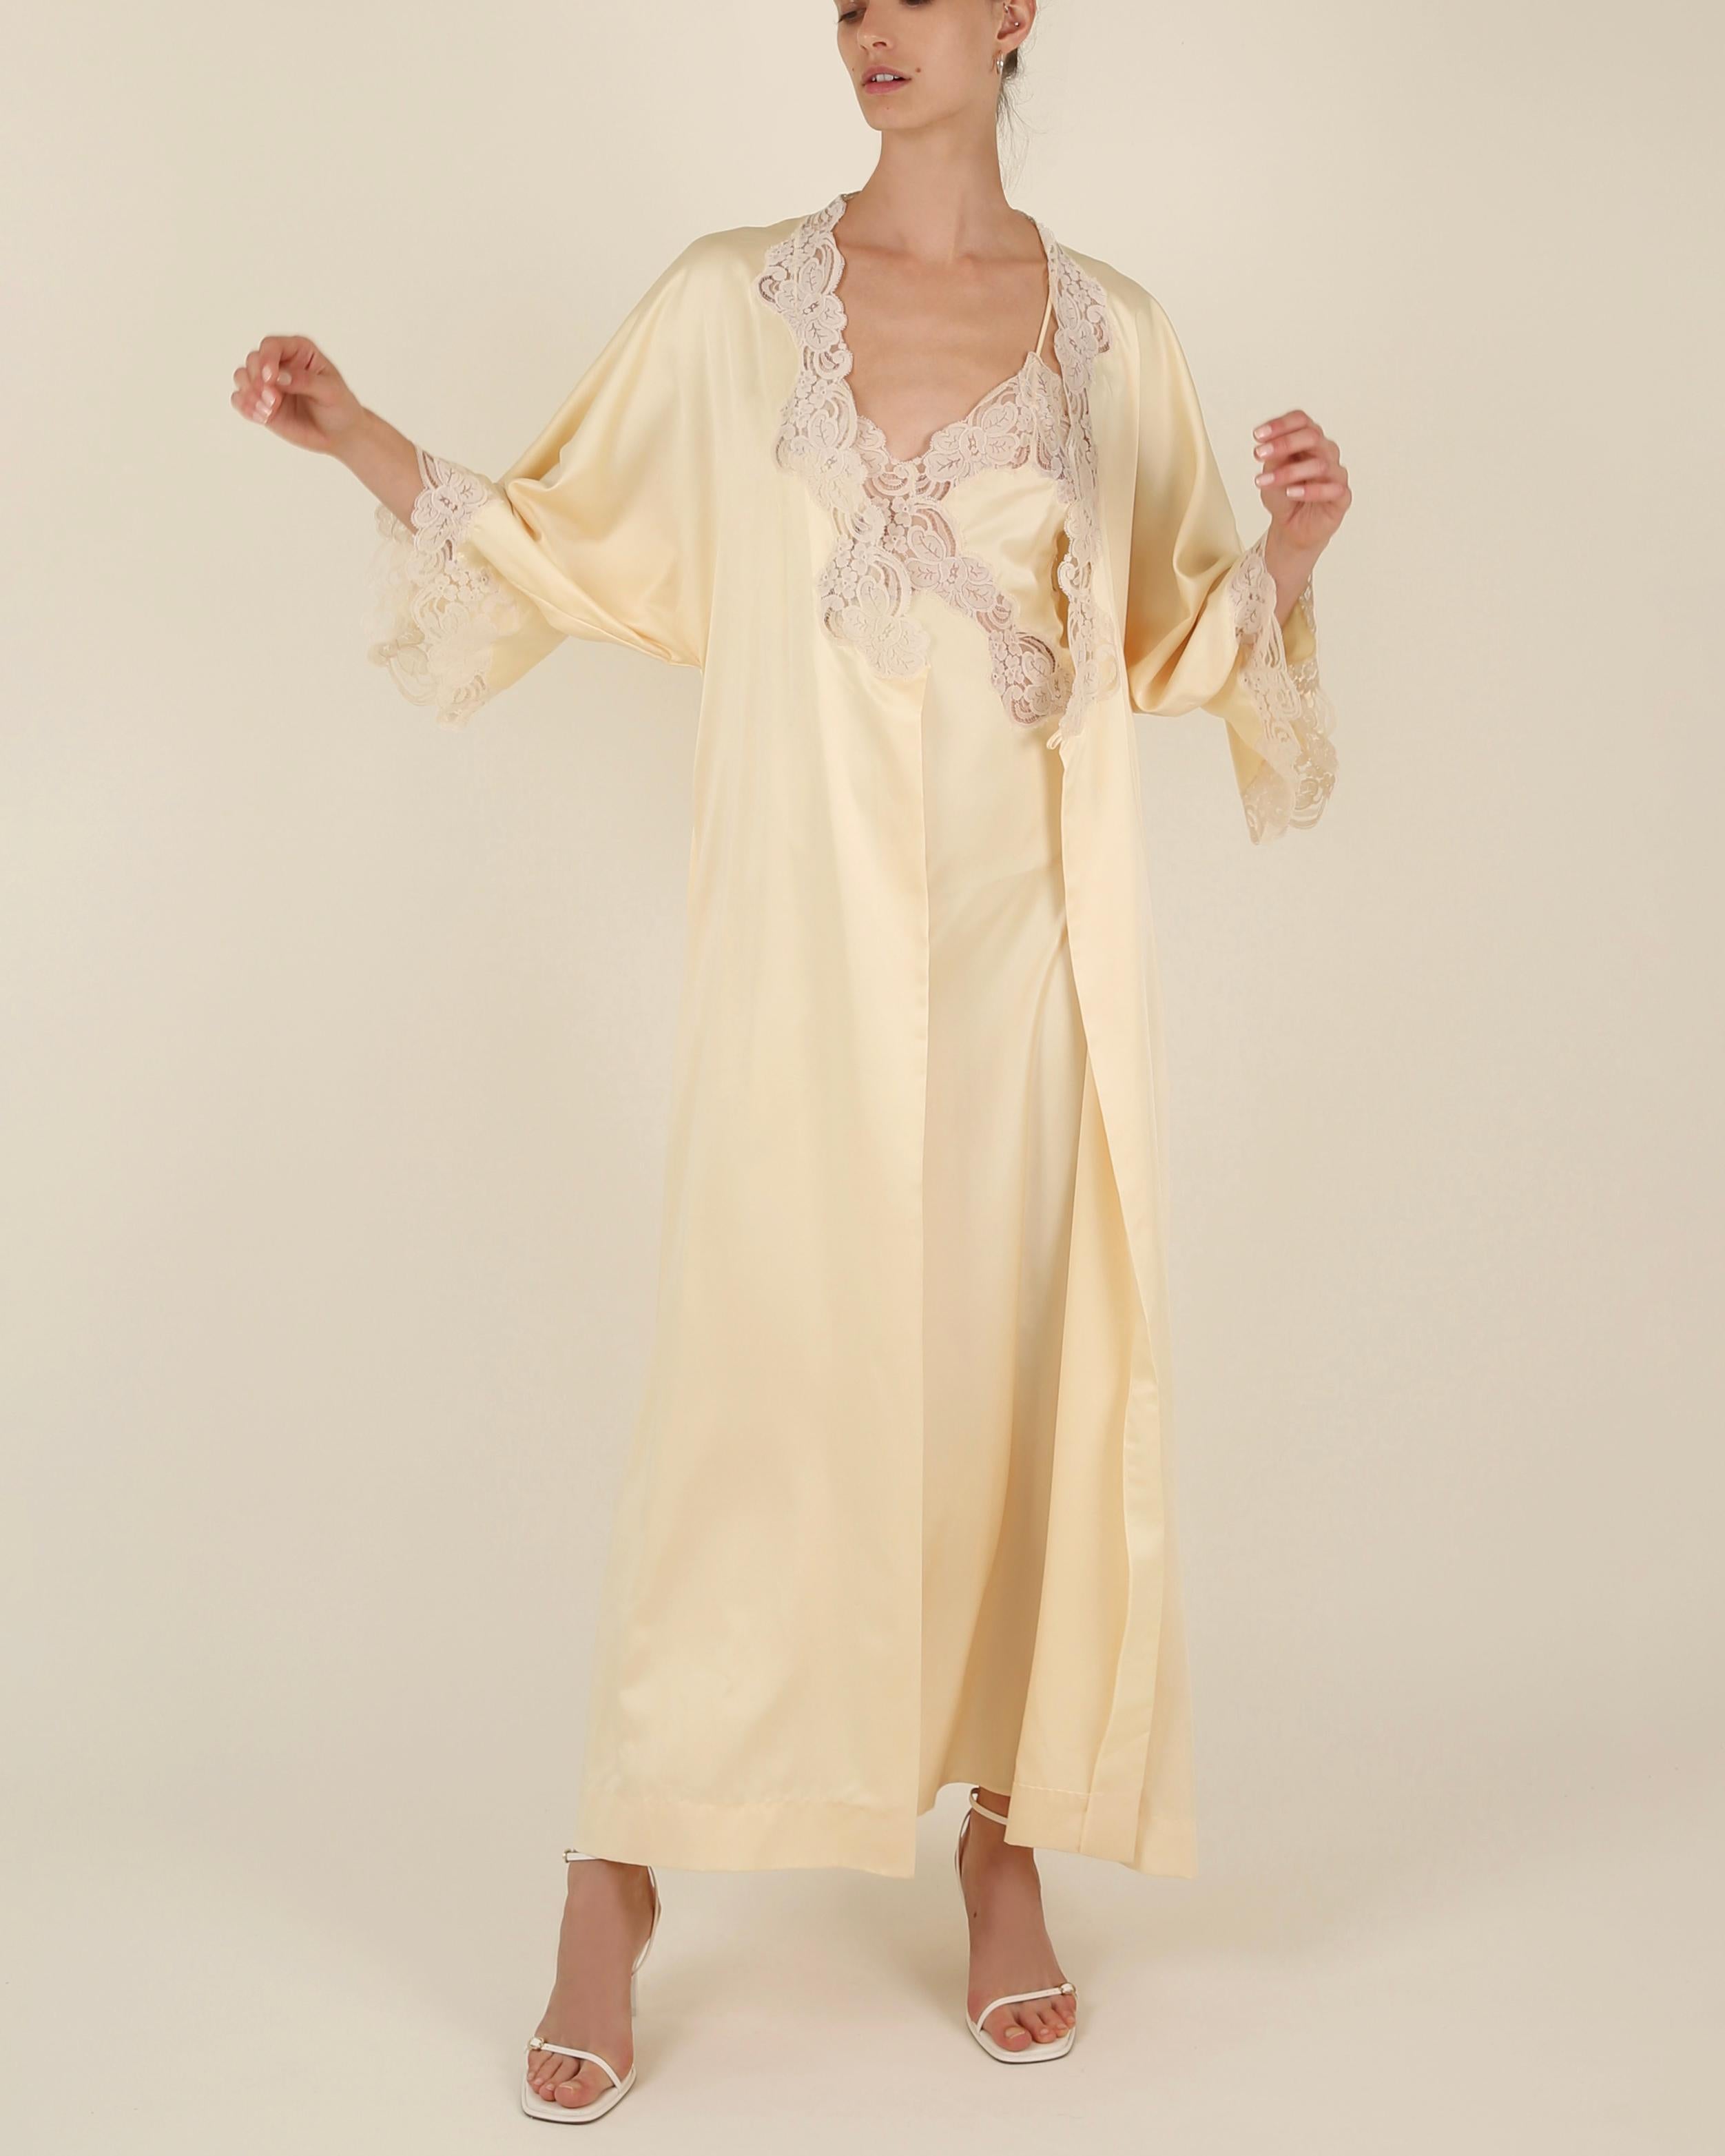 Vintage 1970's silk lace yellow backless thigh slit night gown slip dress & robe 11